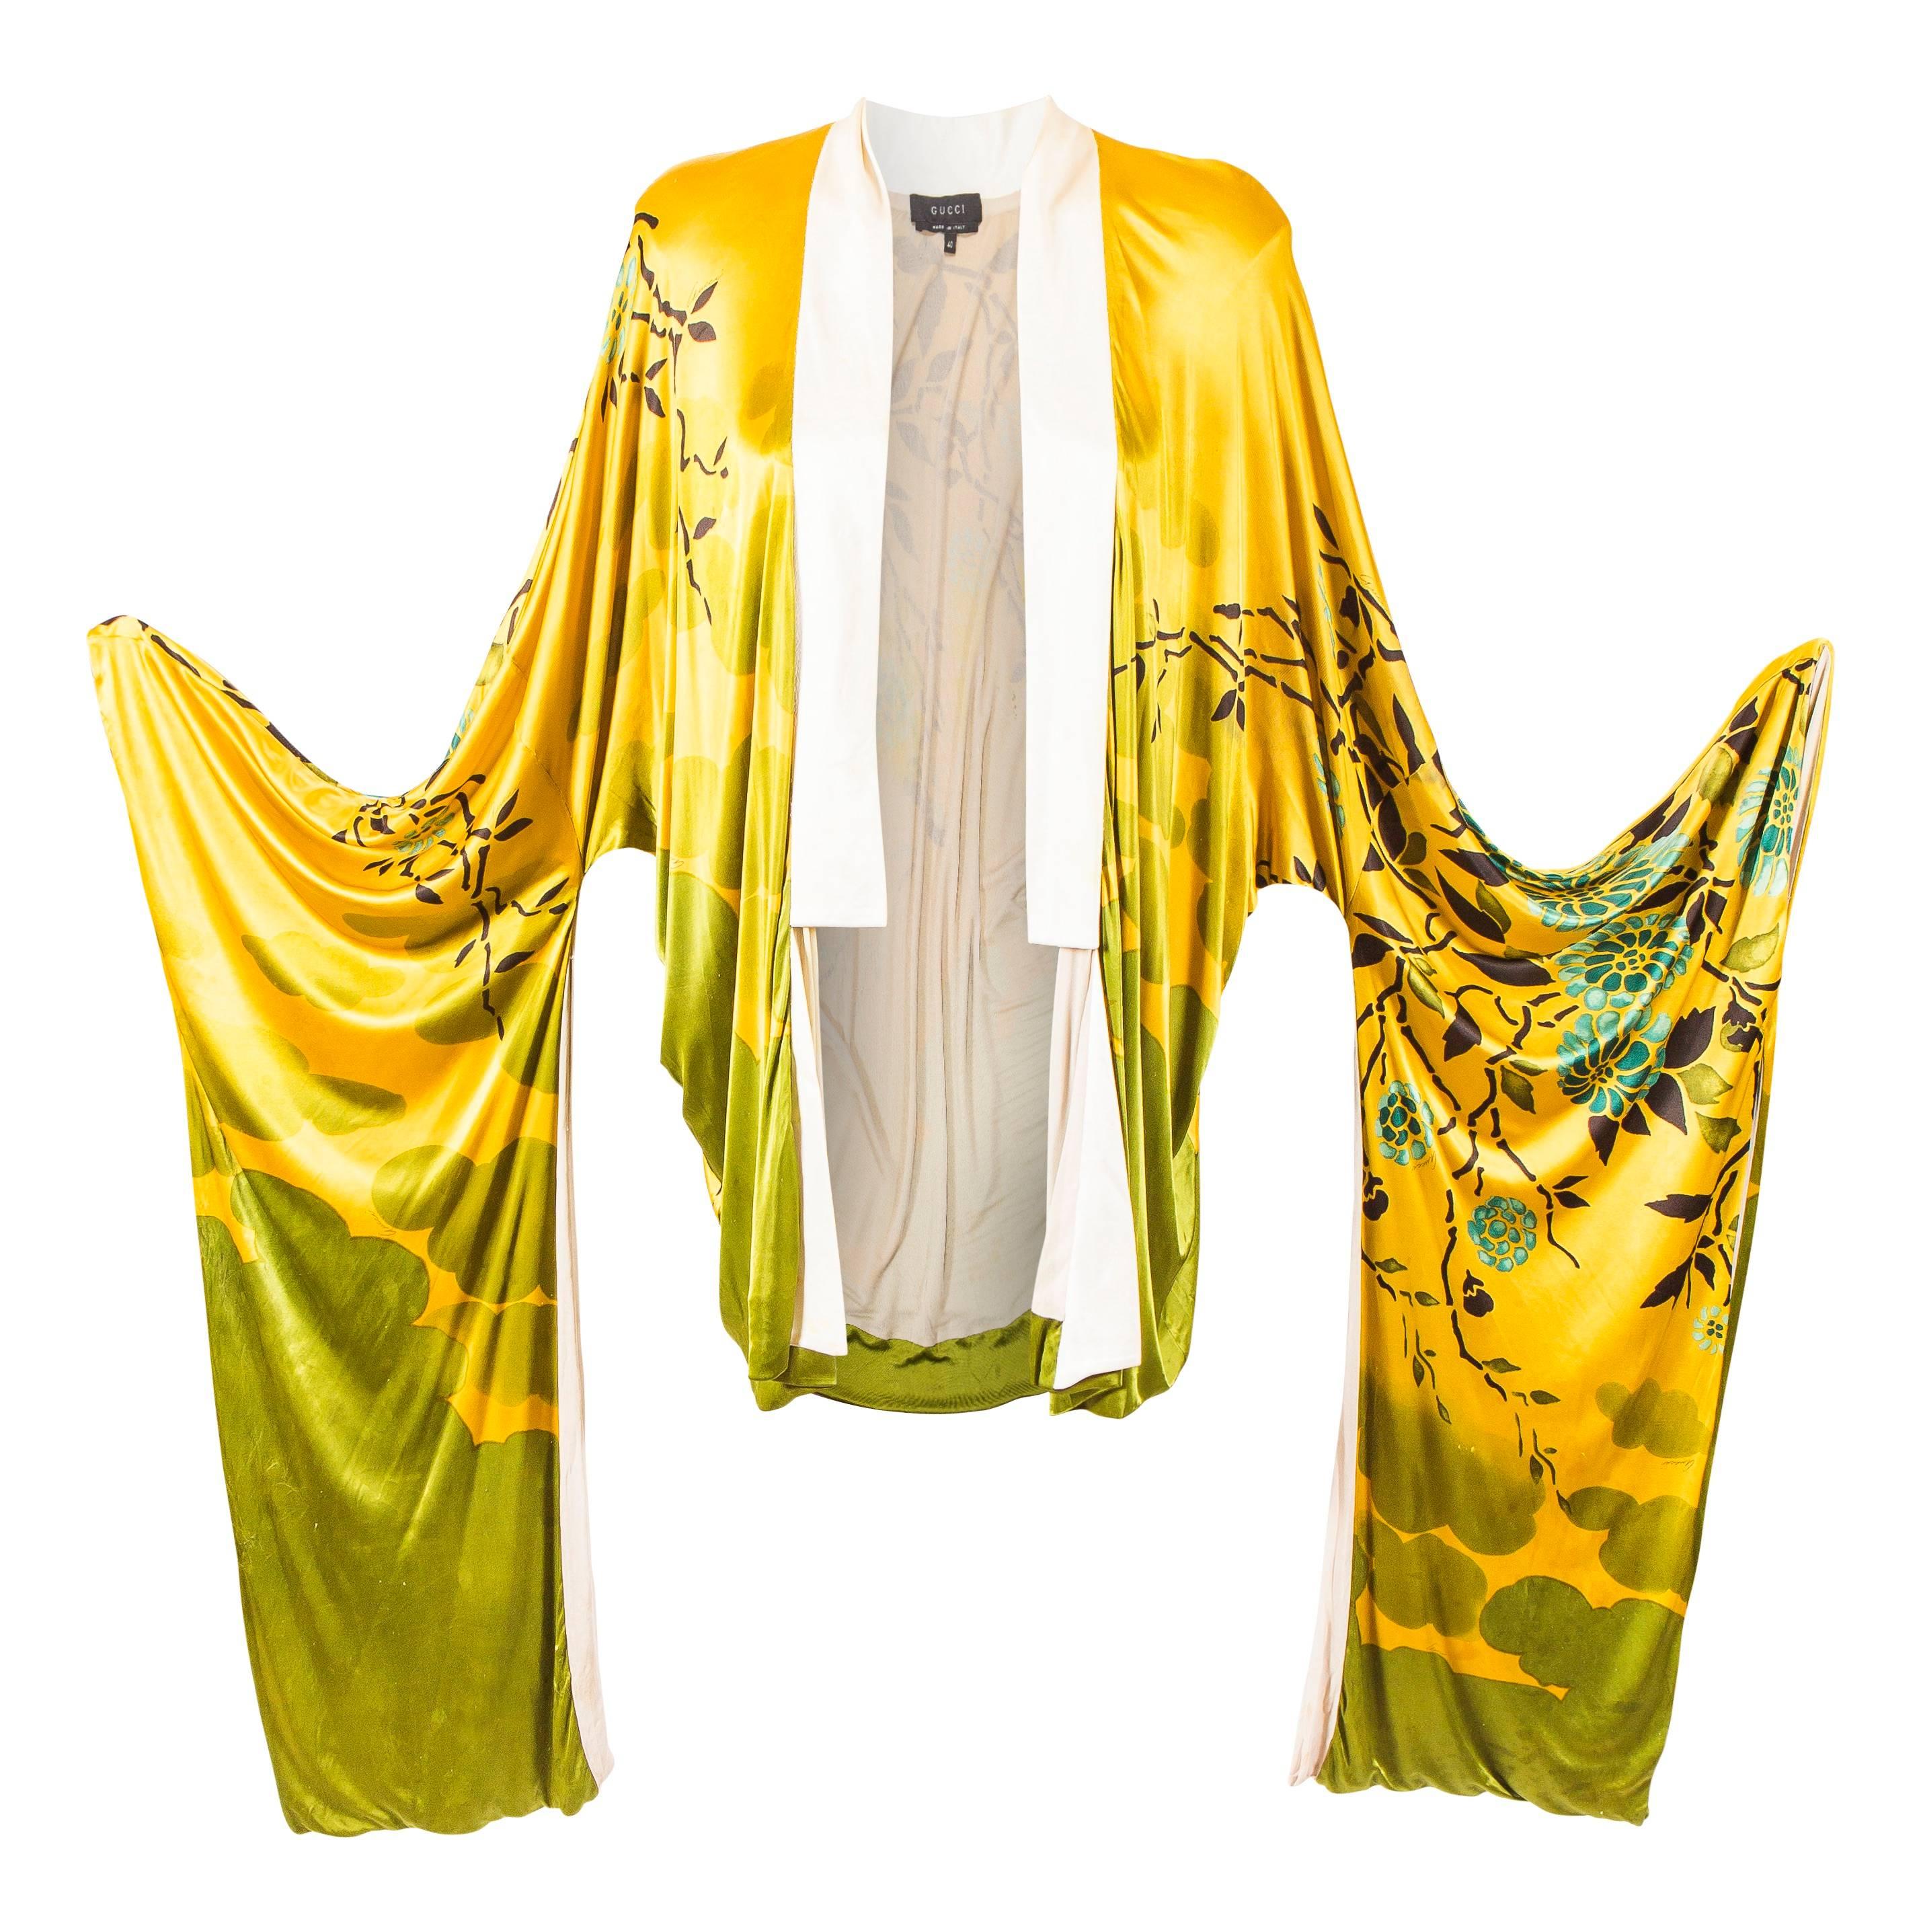 Museum quality and extremely rare Tom Ford For Gucci silk printed kimono from the Spring 2003 collection.

The kimono was used in the advertising campaign for the collection.

Marked an Italian size 38.

Manufacturer - Zamasport